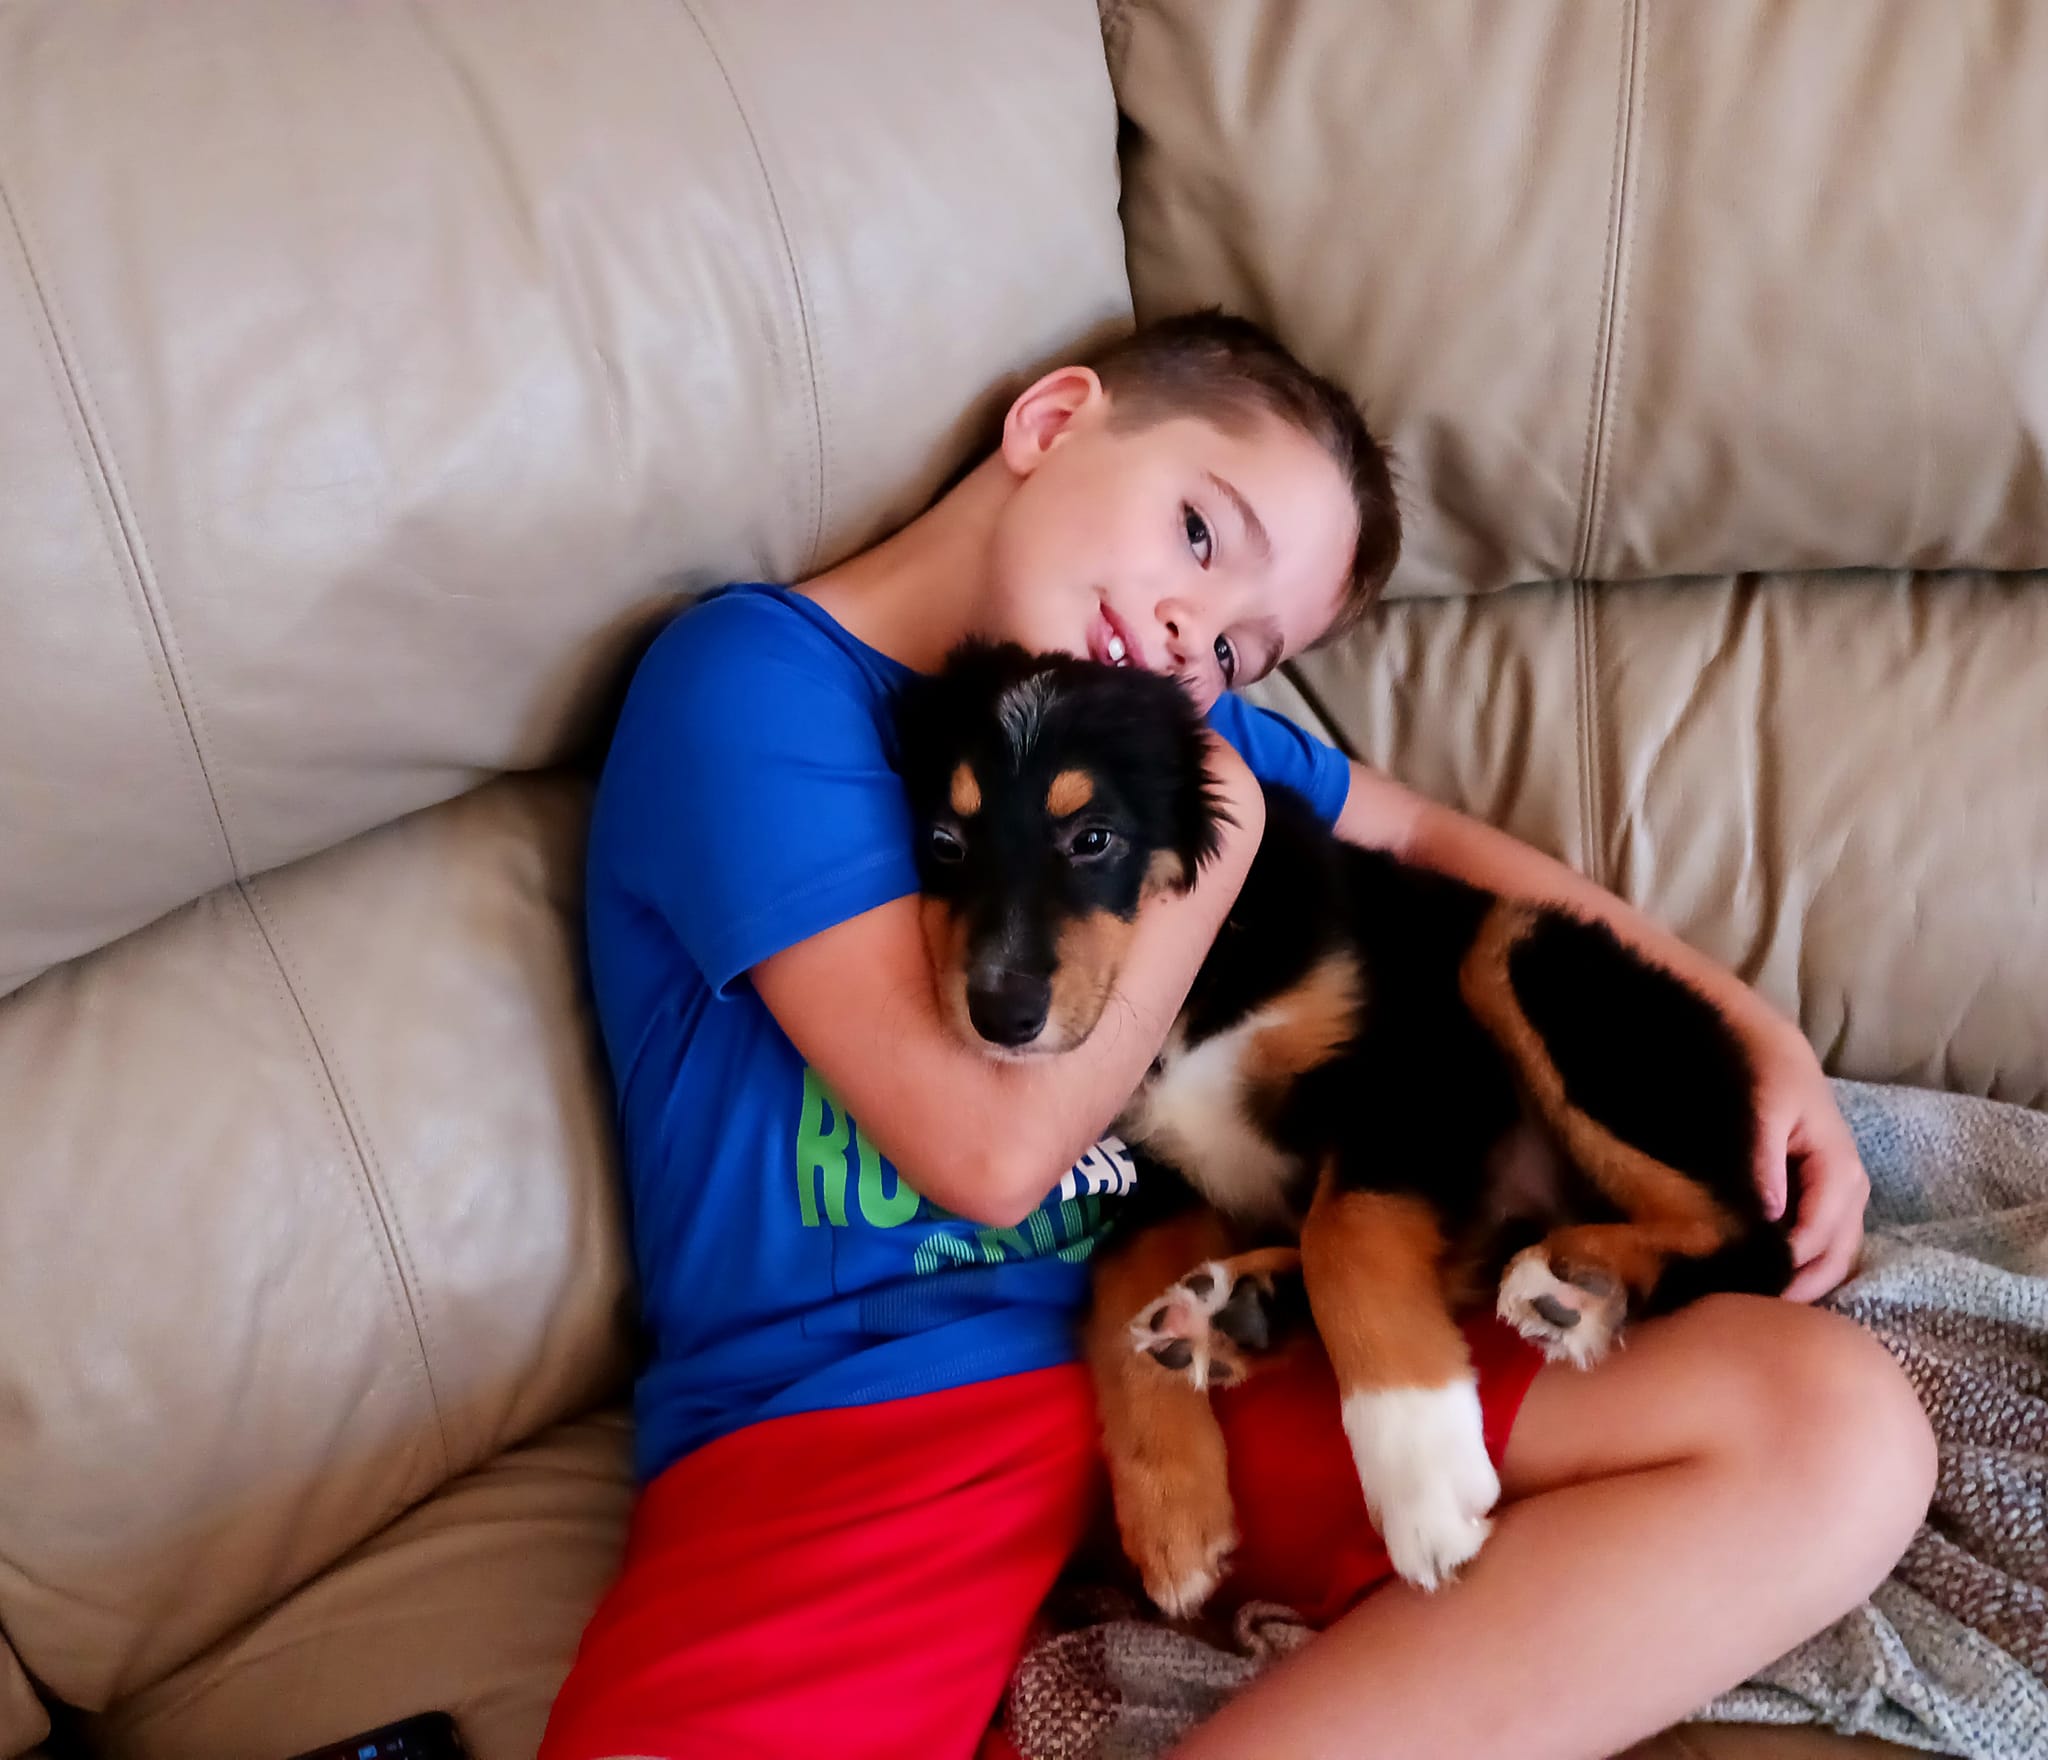 Gavin Keeney cuddles a black and tan puppy on the couch.